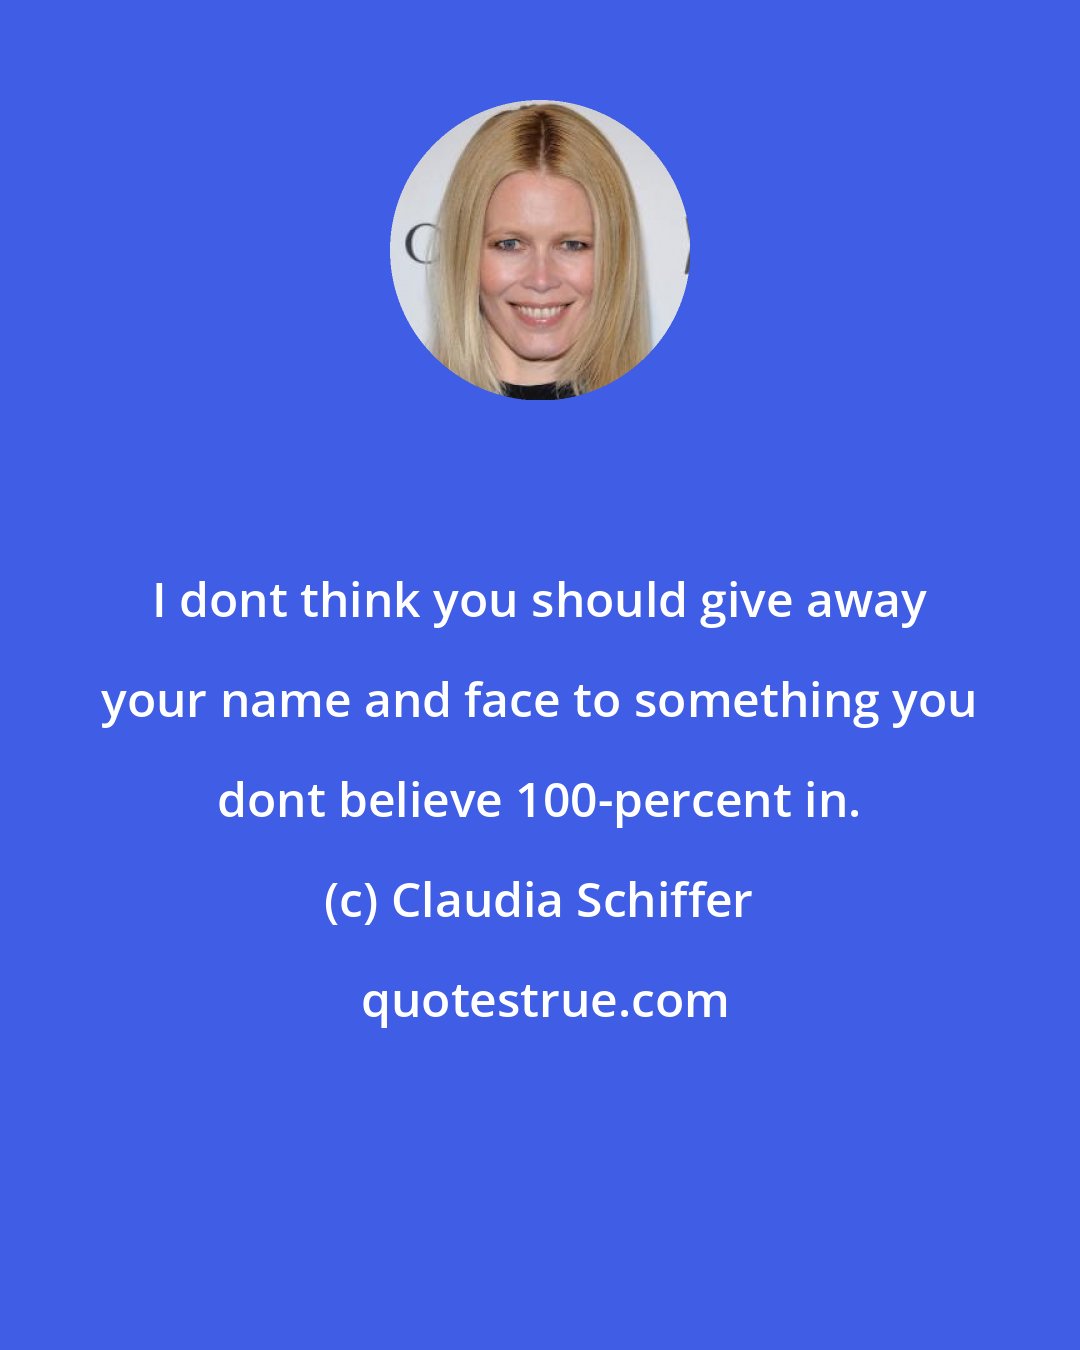 Claudia Schiffer: I dont think you should give away your name and face to something you dont believe 100-percent in.